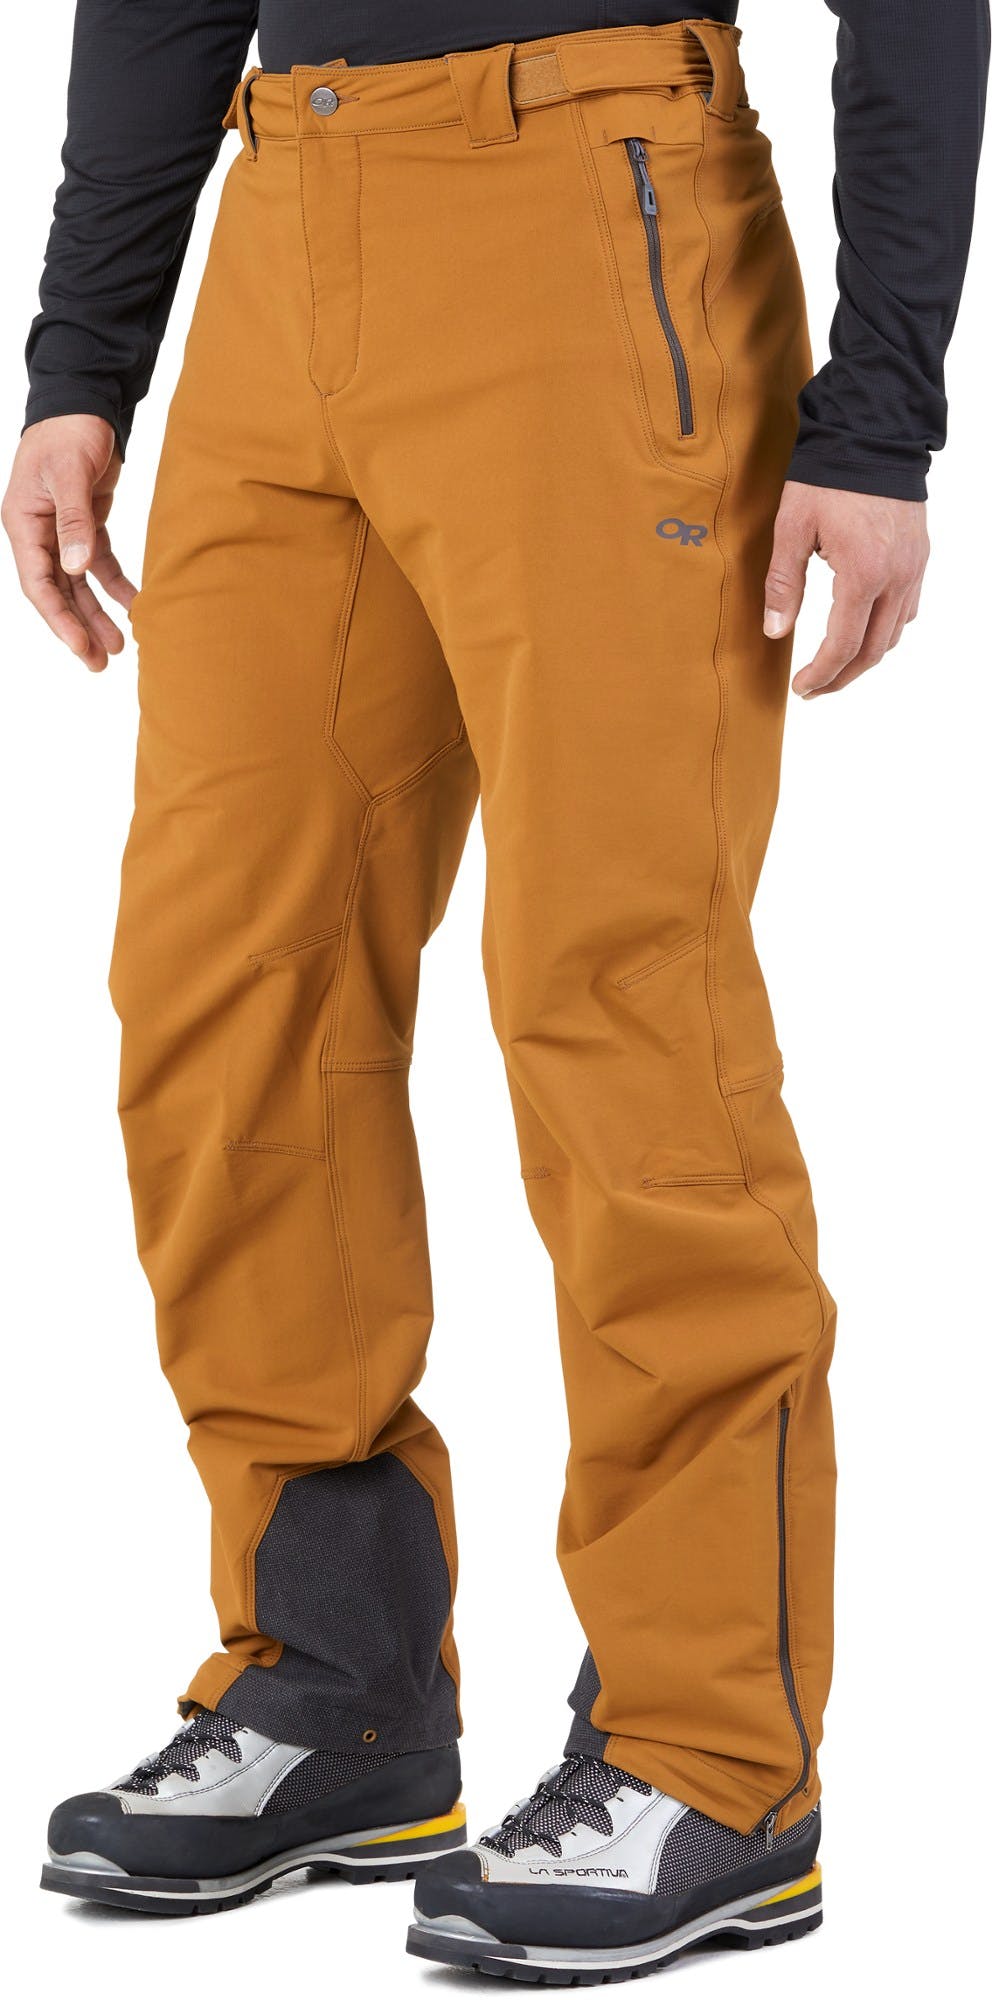 Lowest Price latest Outdoor Research Men's Cirque II Pants All the people